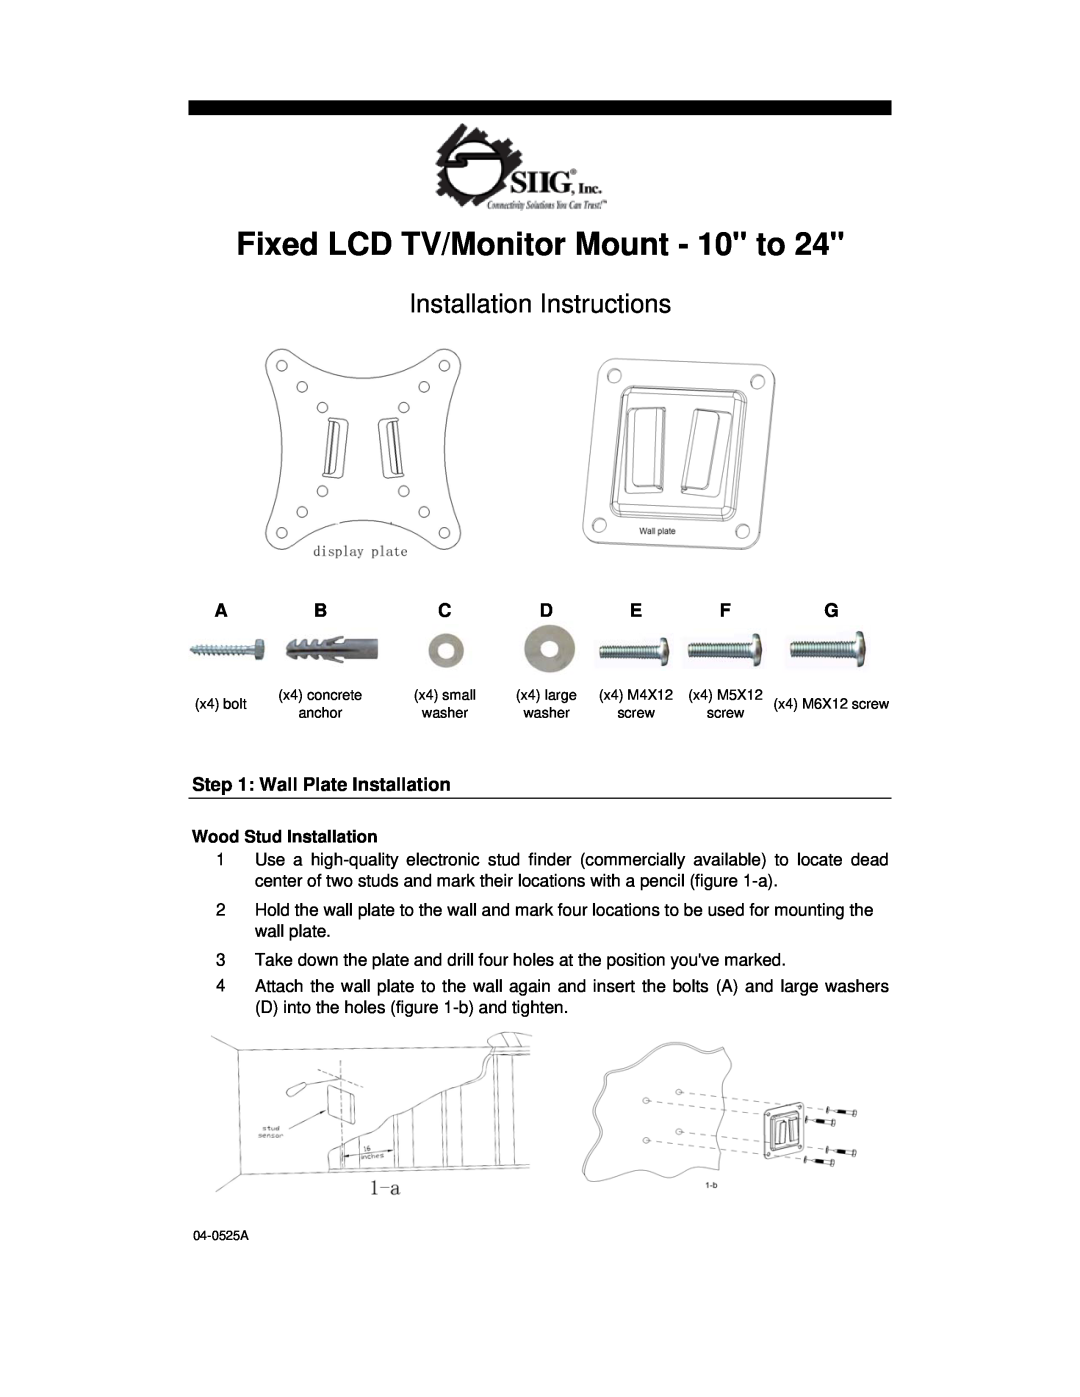 SIIG TV Mount installation instructions Wall Plate Installation, Wood Stud Installation, Installation Instructions 